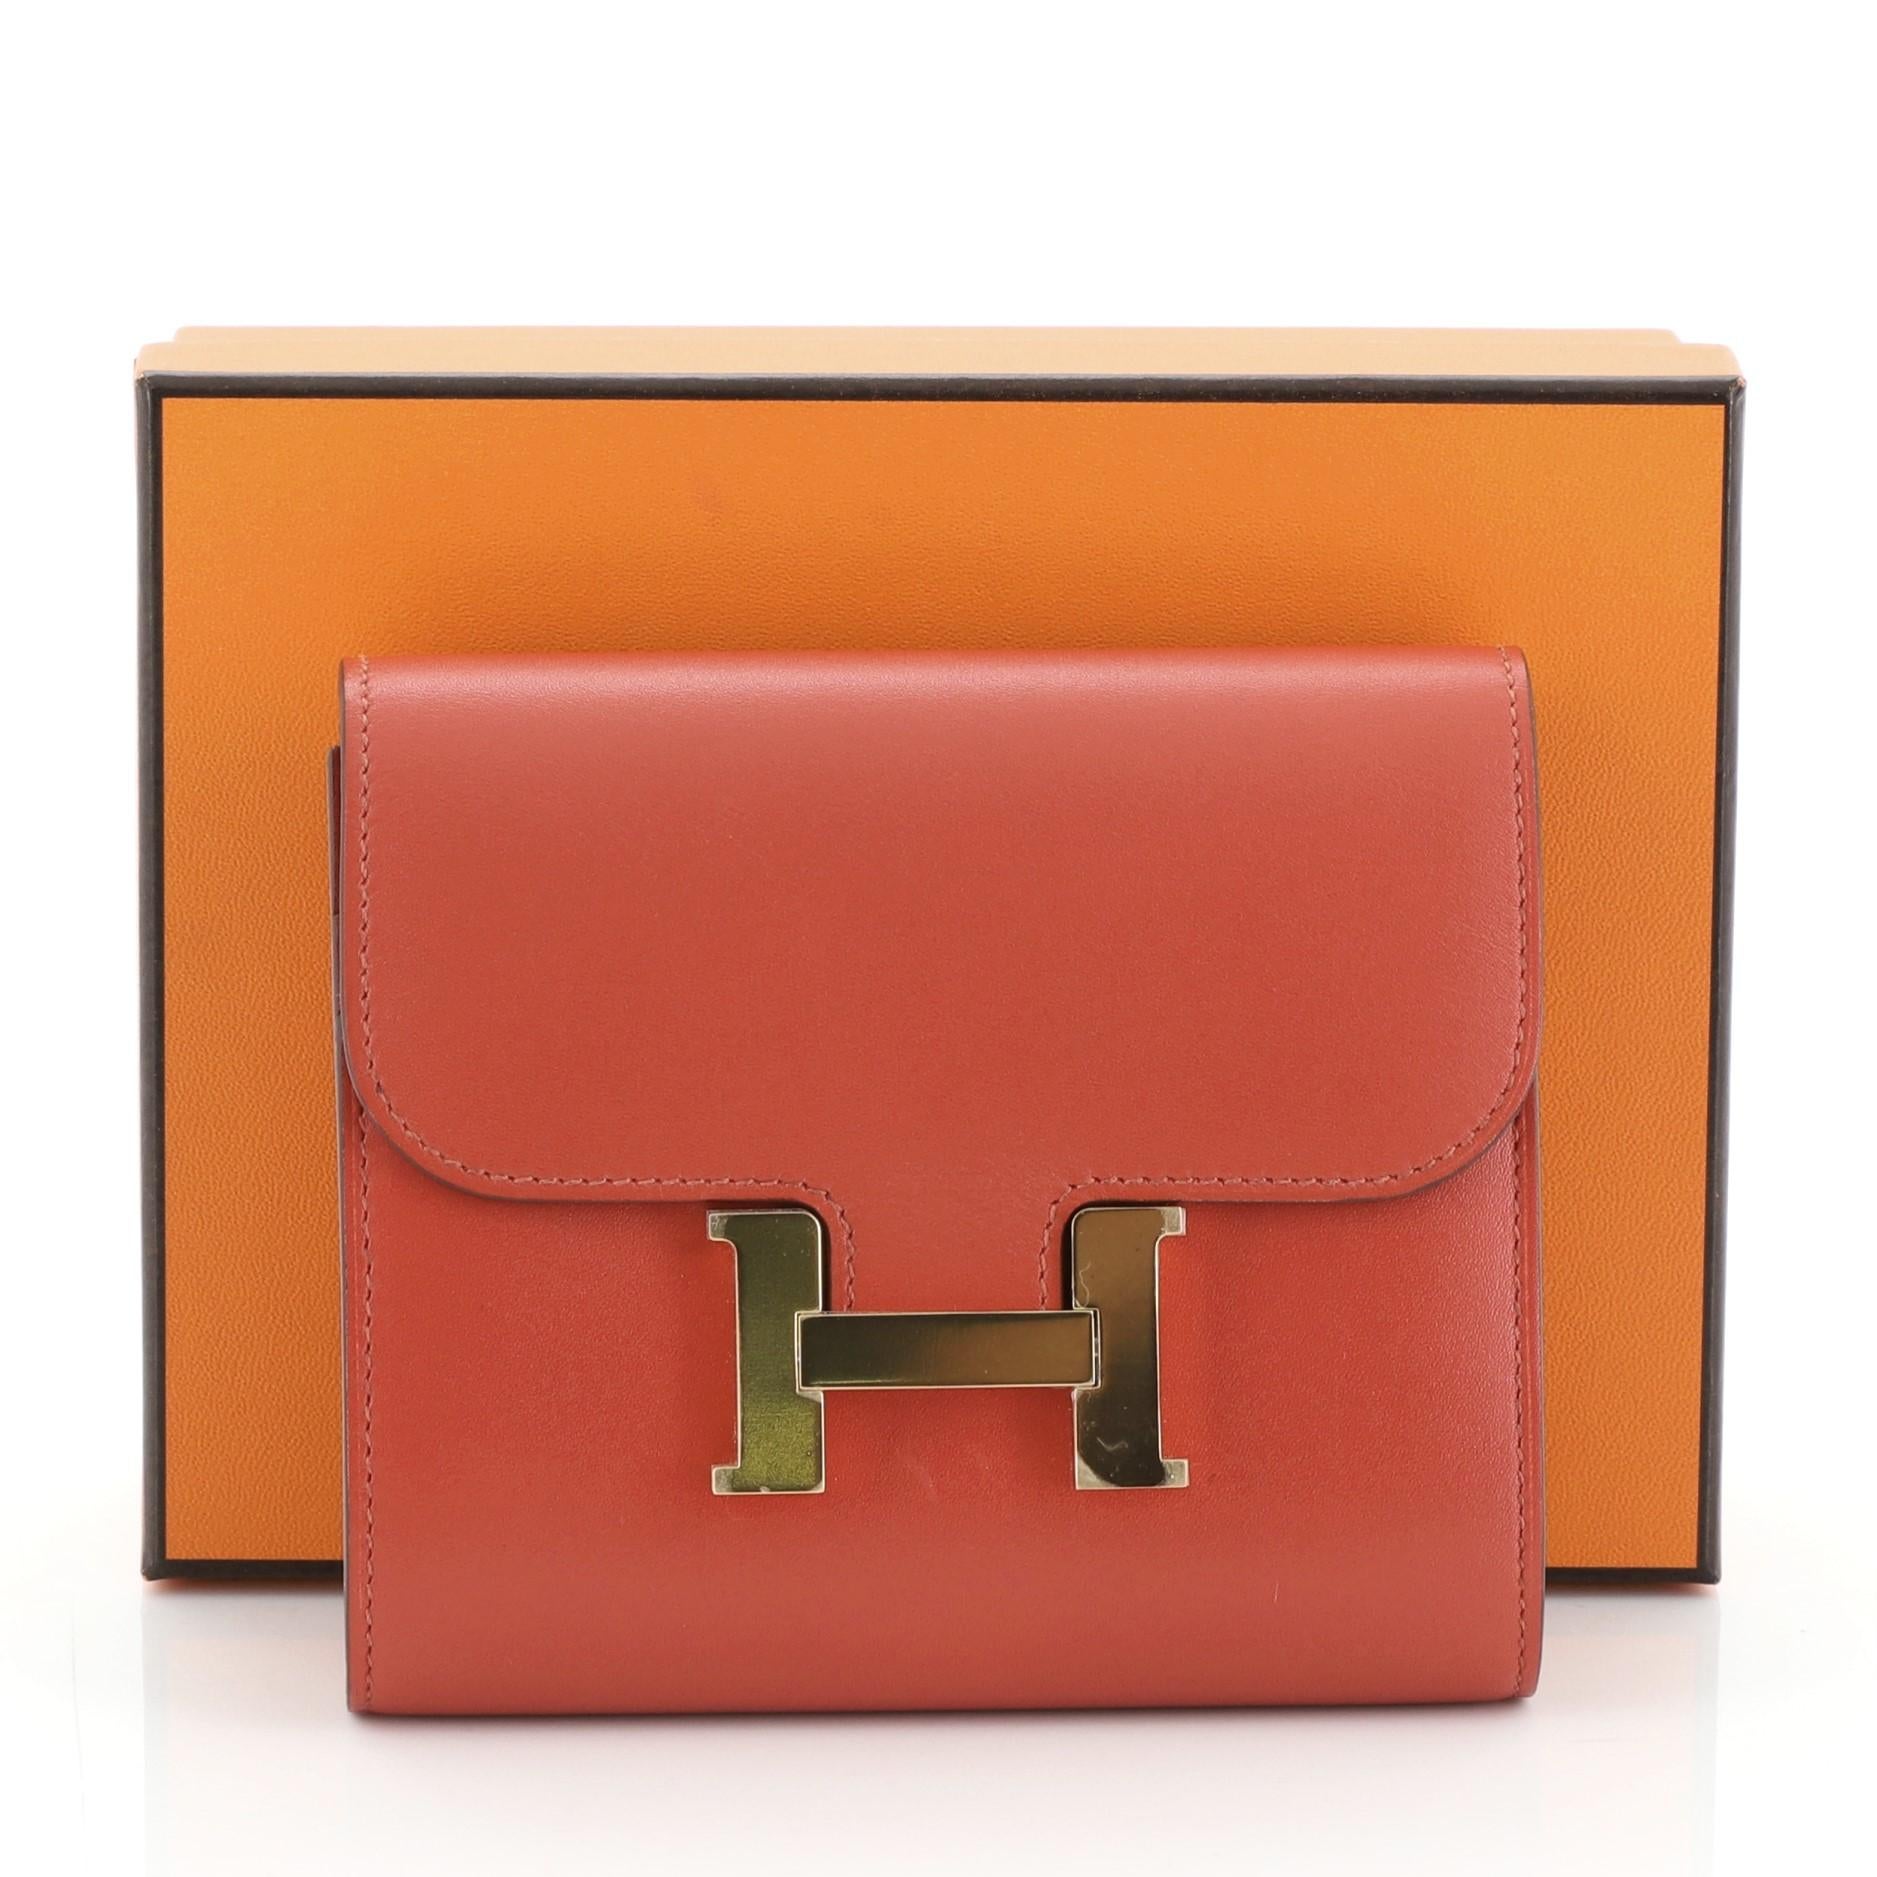 This Hermes Constance Wallet Swift Compact, crafted from Sanguine orange Swift leather, features a frontal constance 